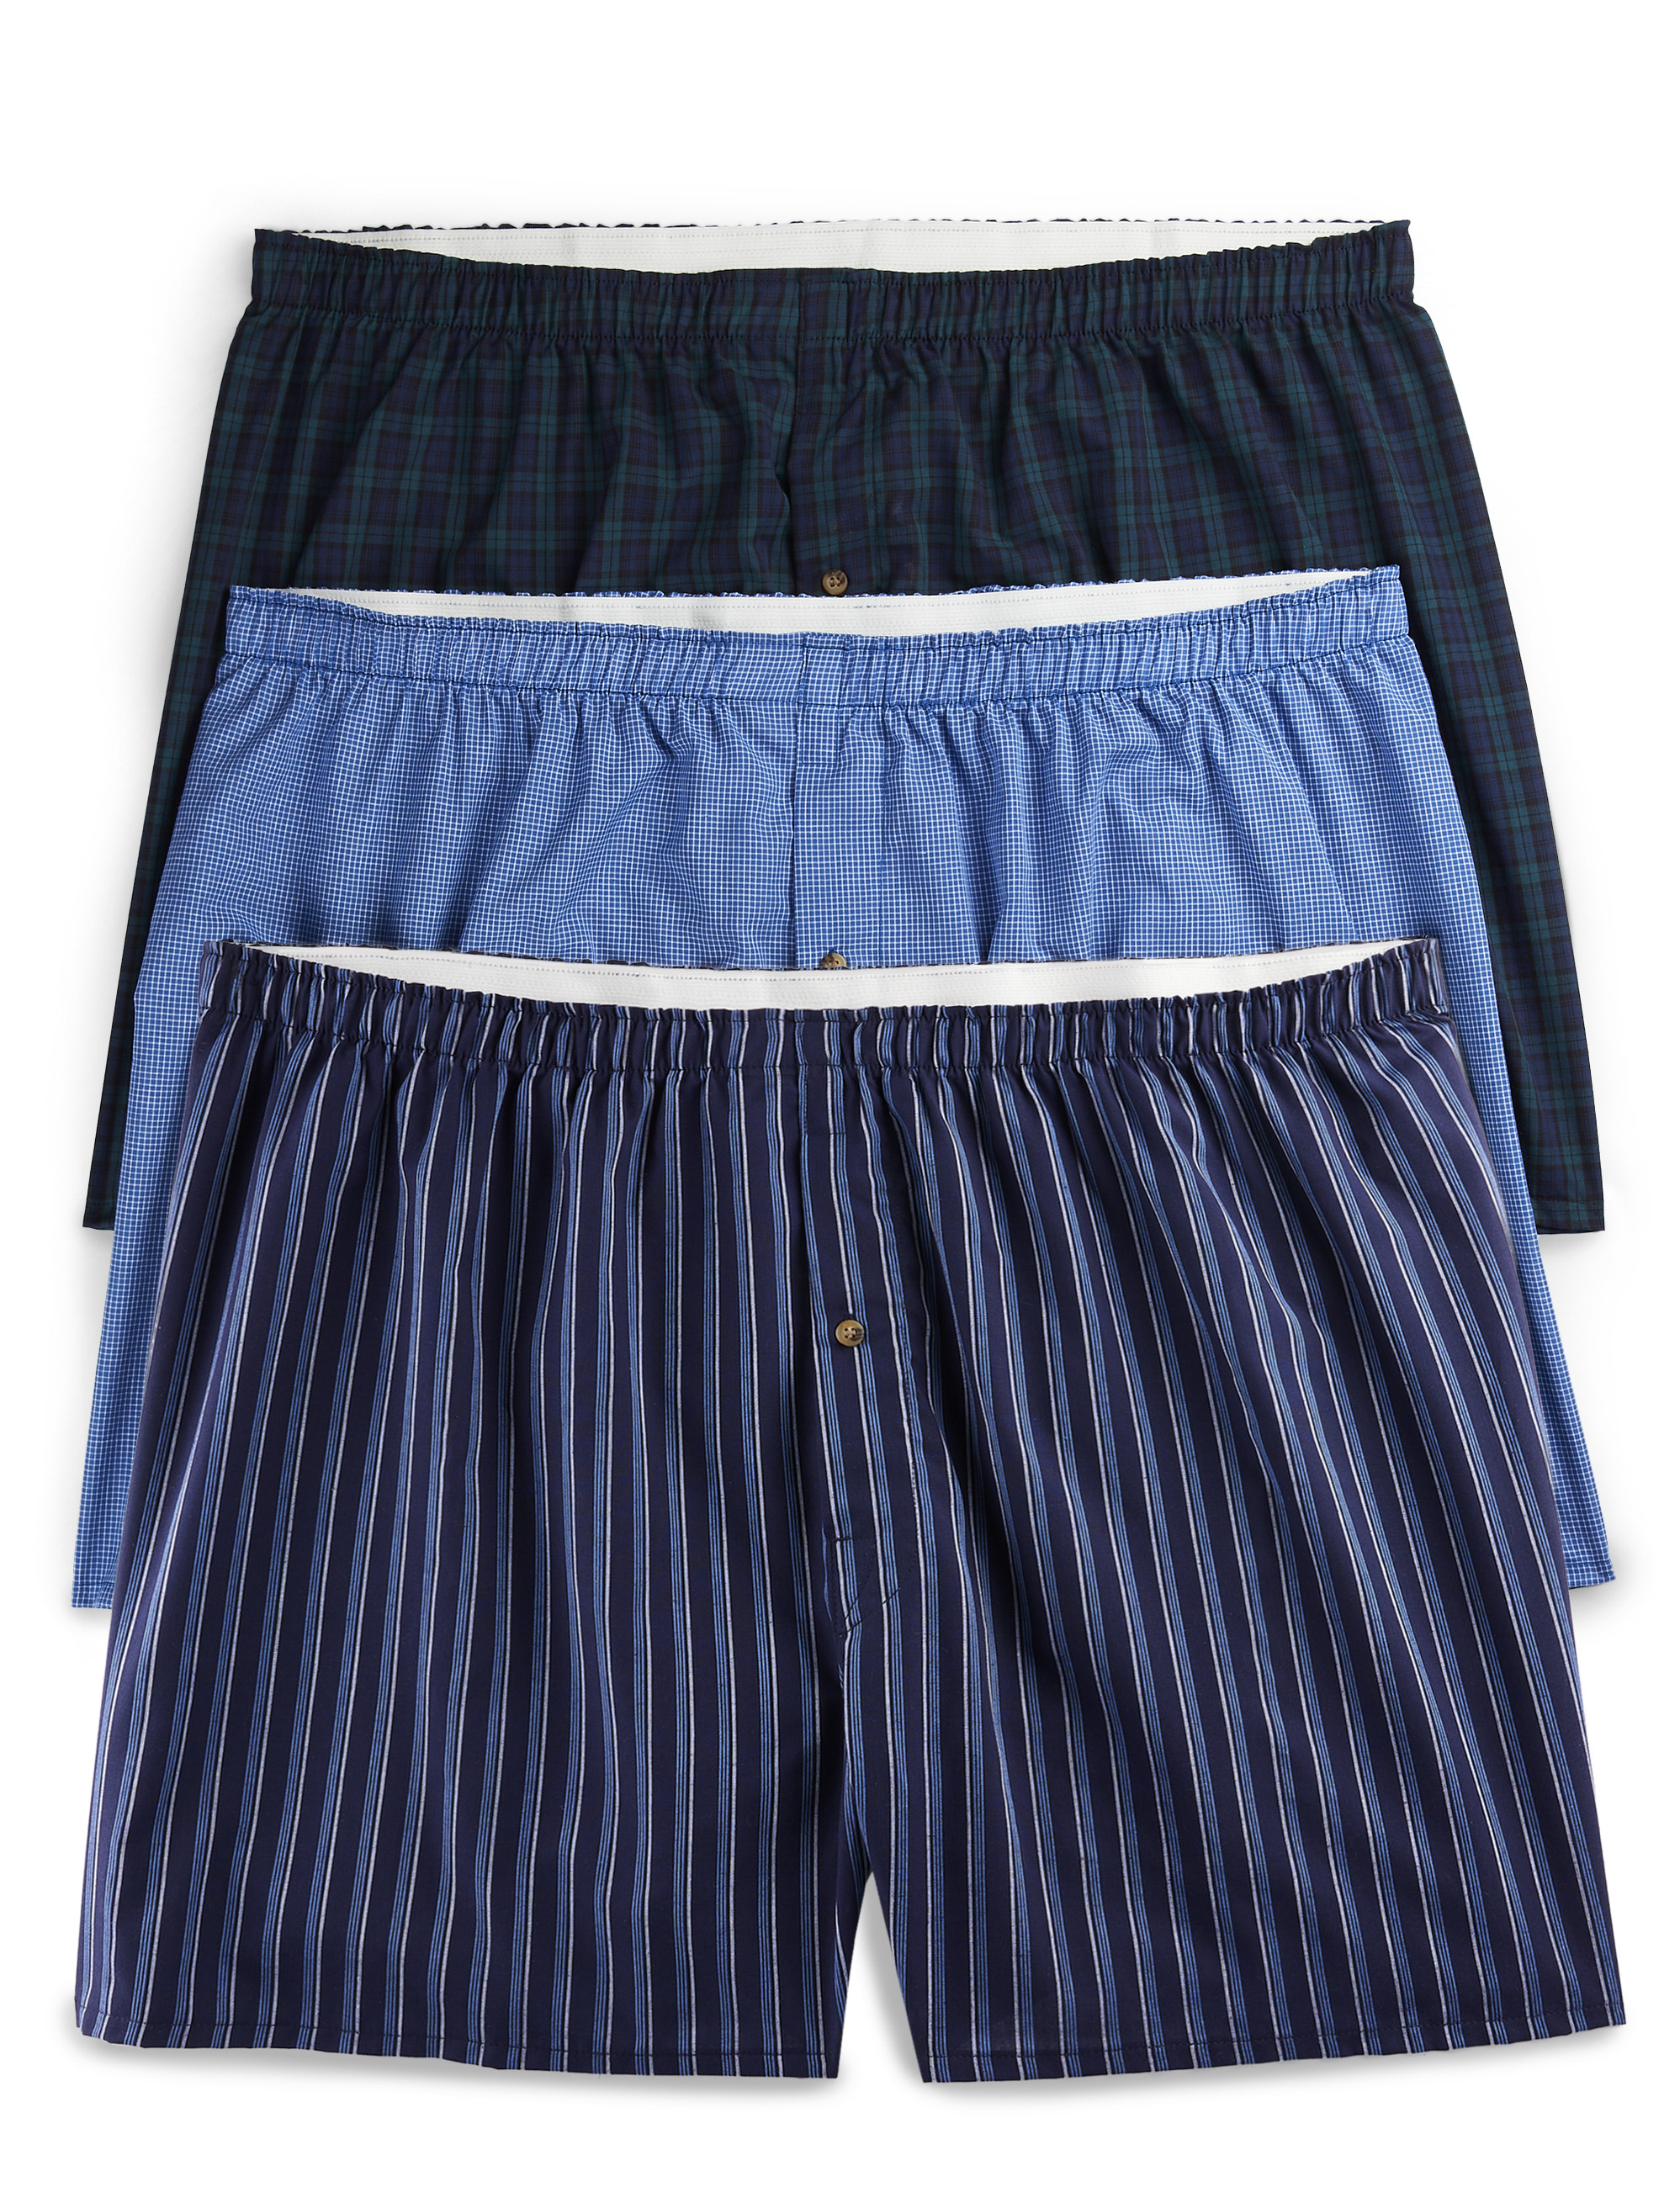 Big + Tall, Harbor Bay 3-Pack Boxer Briefs